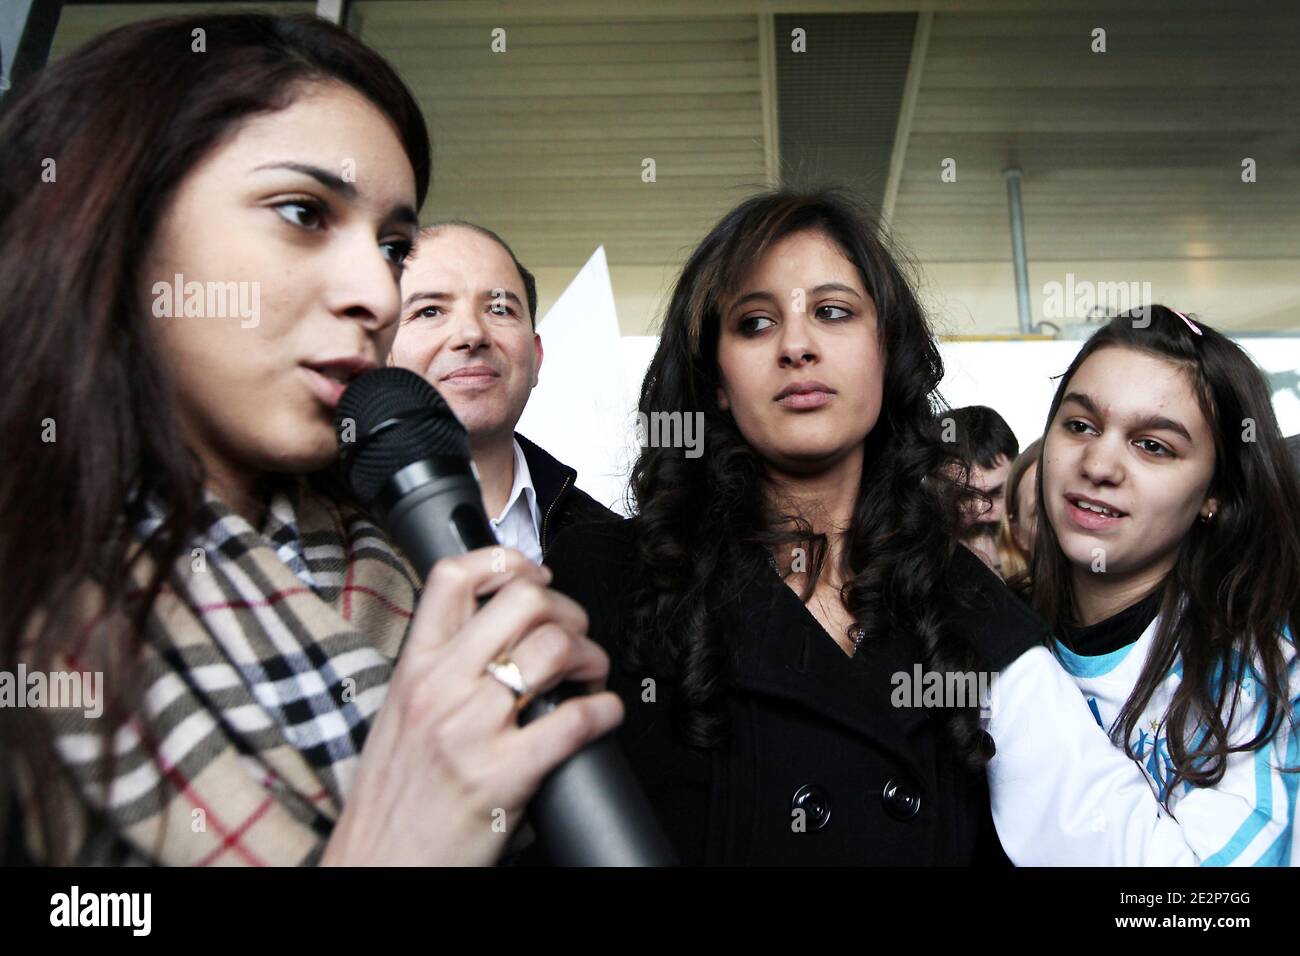 Najlae Lhimer a Moroccan high school student recently expelled from France as an illegal immigrant is welcomed upon her arrival at Orly airport, in Paris, France, from Casablanca, on March 13, 2010. Najlae, who was arrested last February after pressing charges of violence against her brother and expelled to Morocco as illegall immigrant, was authorized this week to return to France by French President Nicolas Sarkozy. Photo by Stephane Lemouton/ABACAPRESS.COM Stock Photo